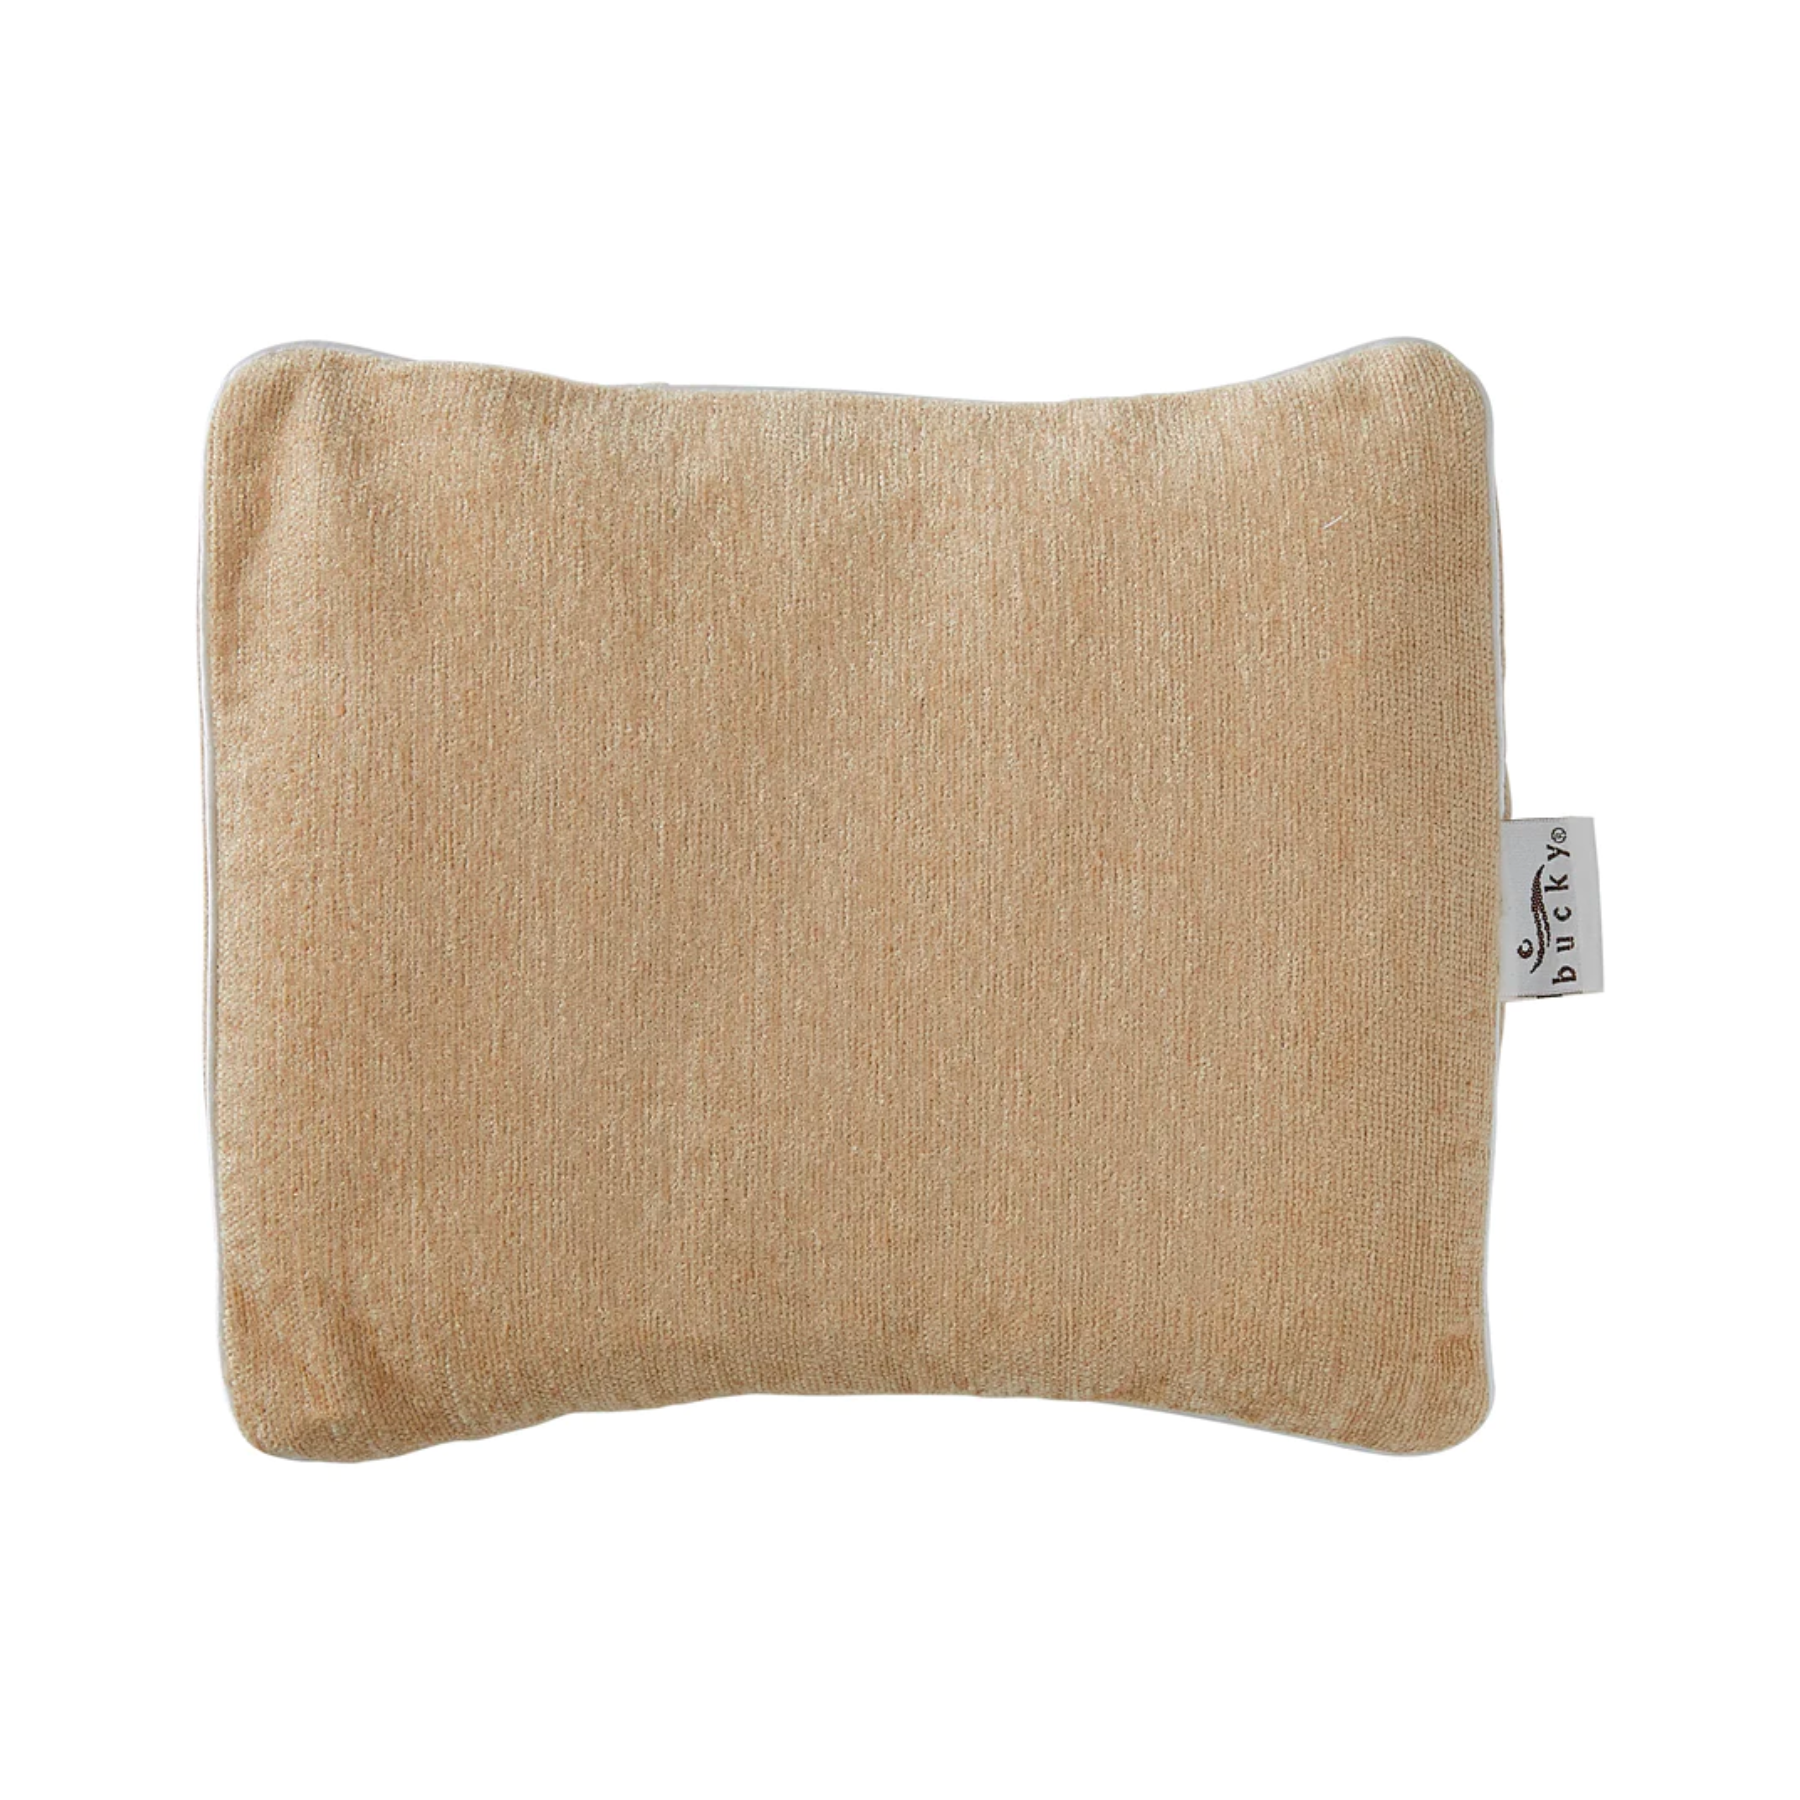 Bucky Hot and Cold Therapy Compact Wrap